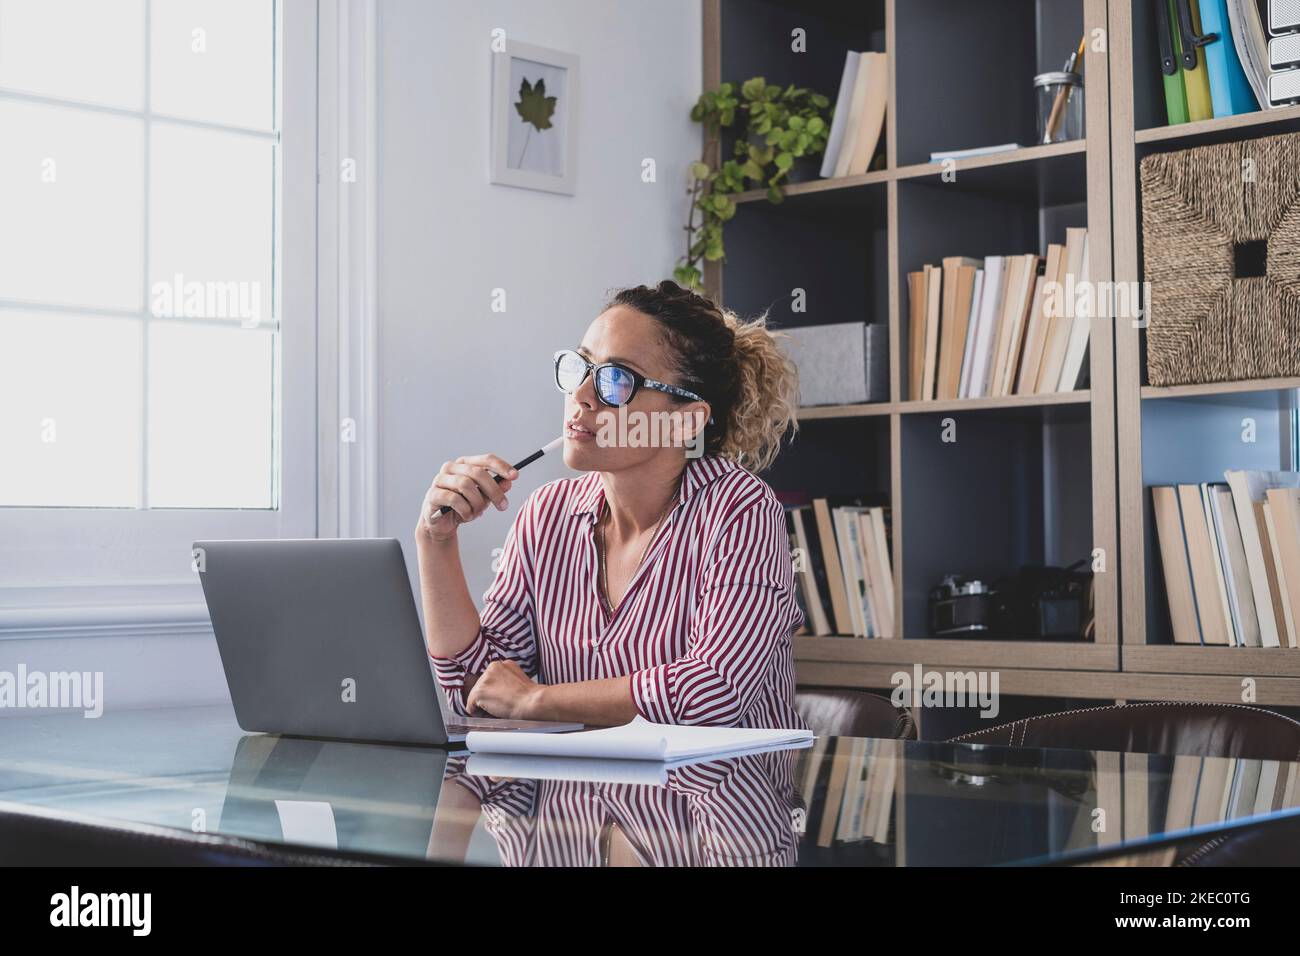 Caucasian reflexive looking at laptop screen, reflexing on work, businesswoman independent working in a difficult project. Female person preparing at home in the office indoor. Stock Photo